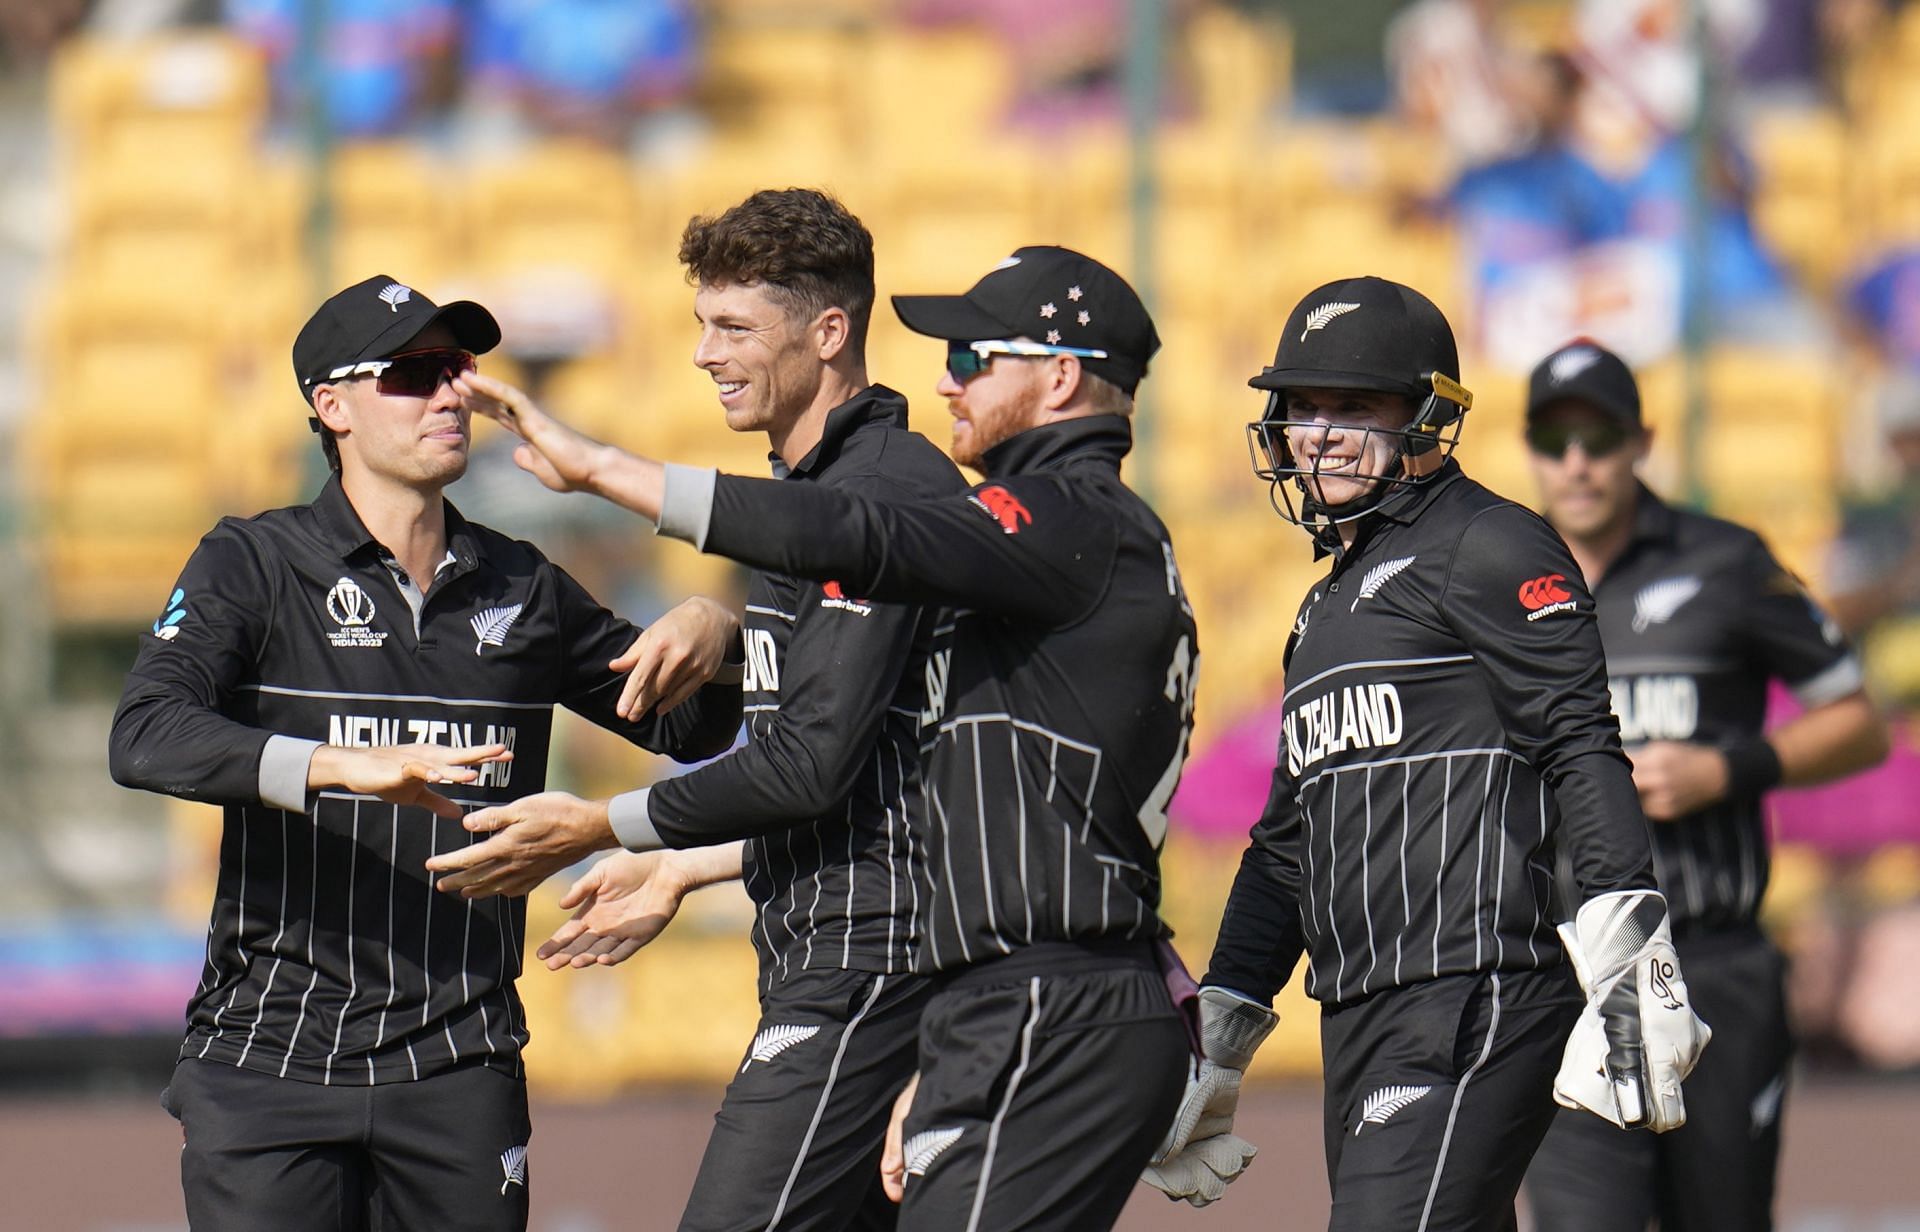 New Zealand national cricket team. (Credits: Getty)